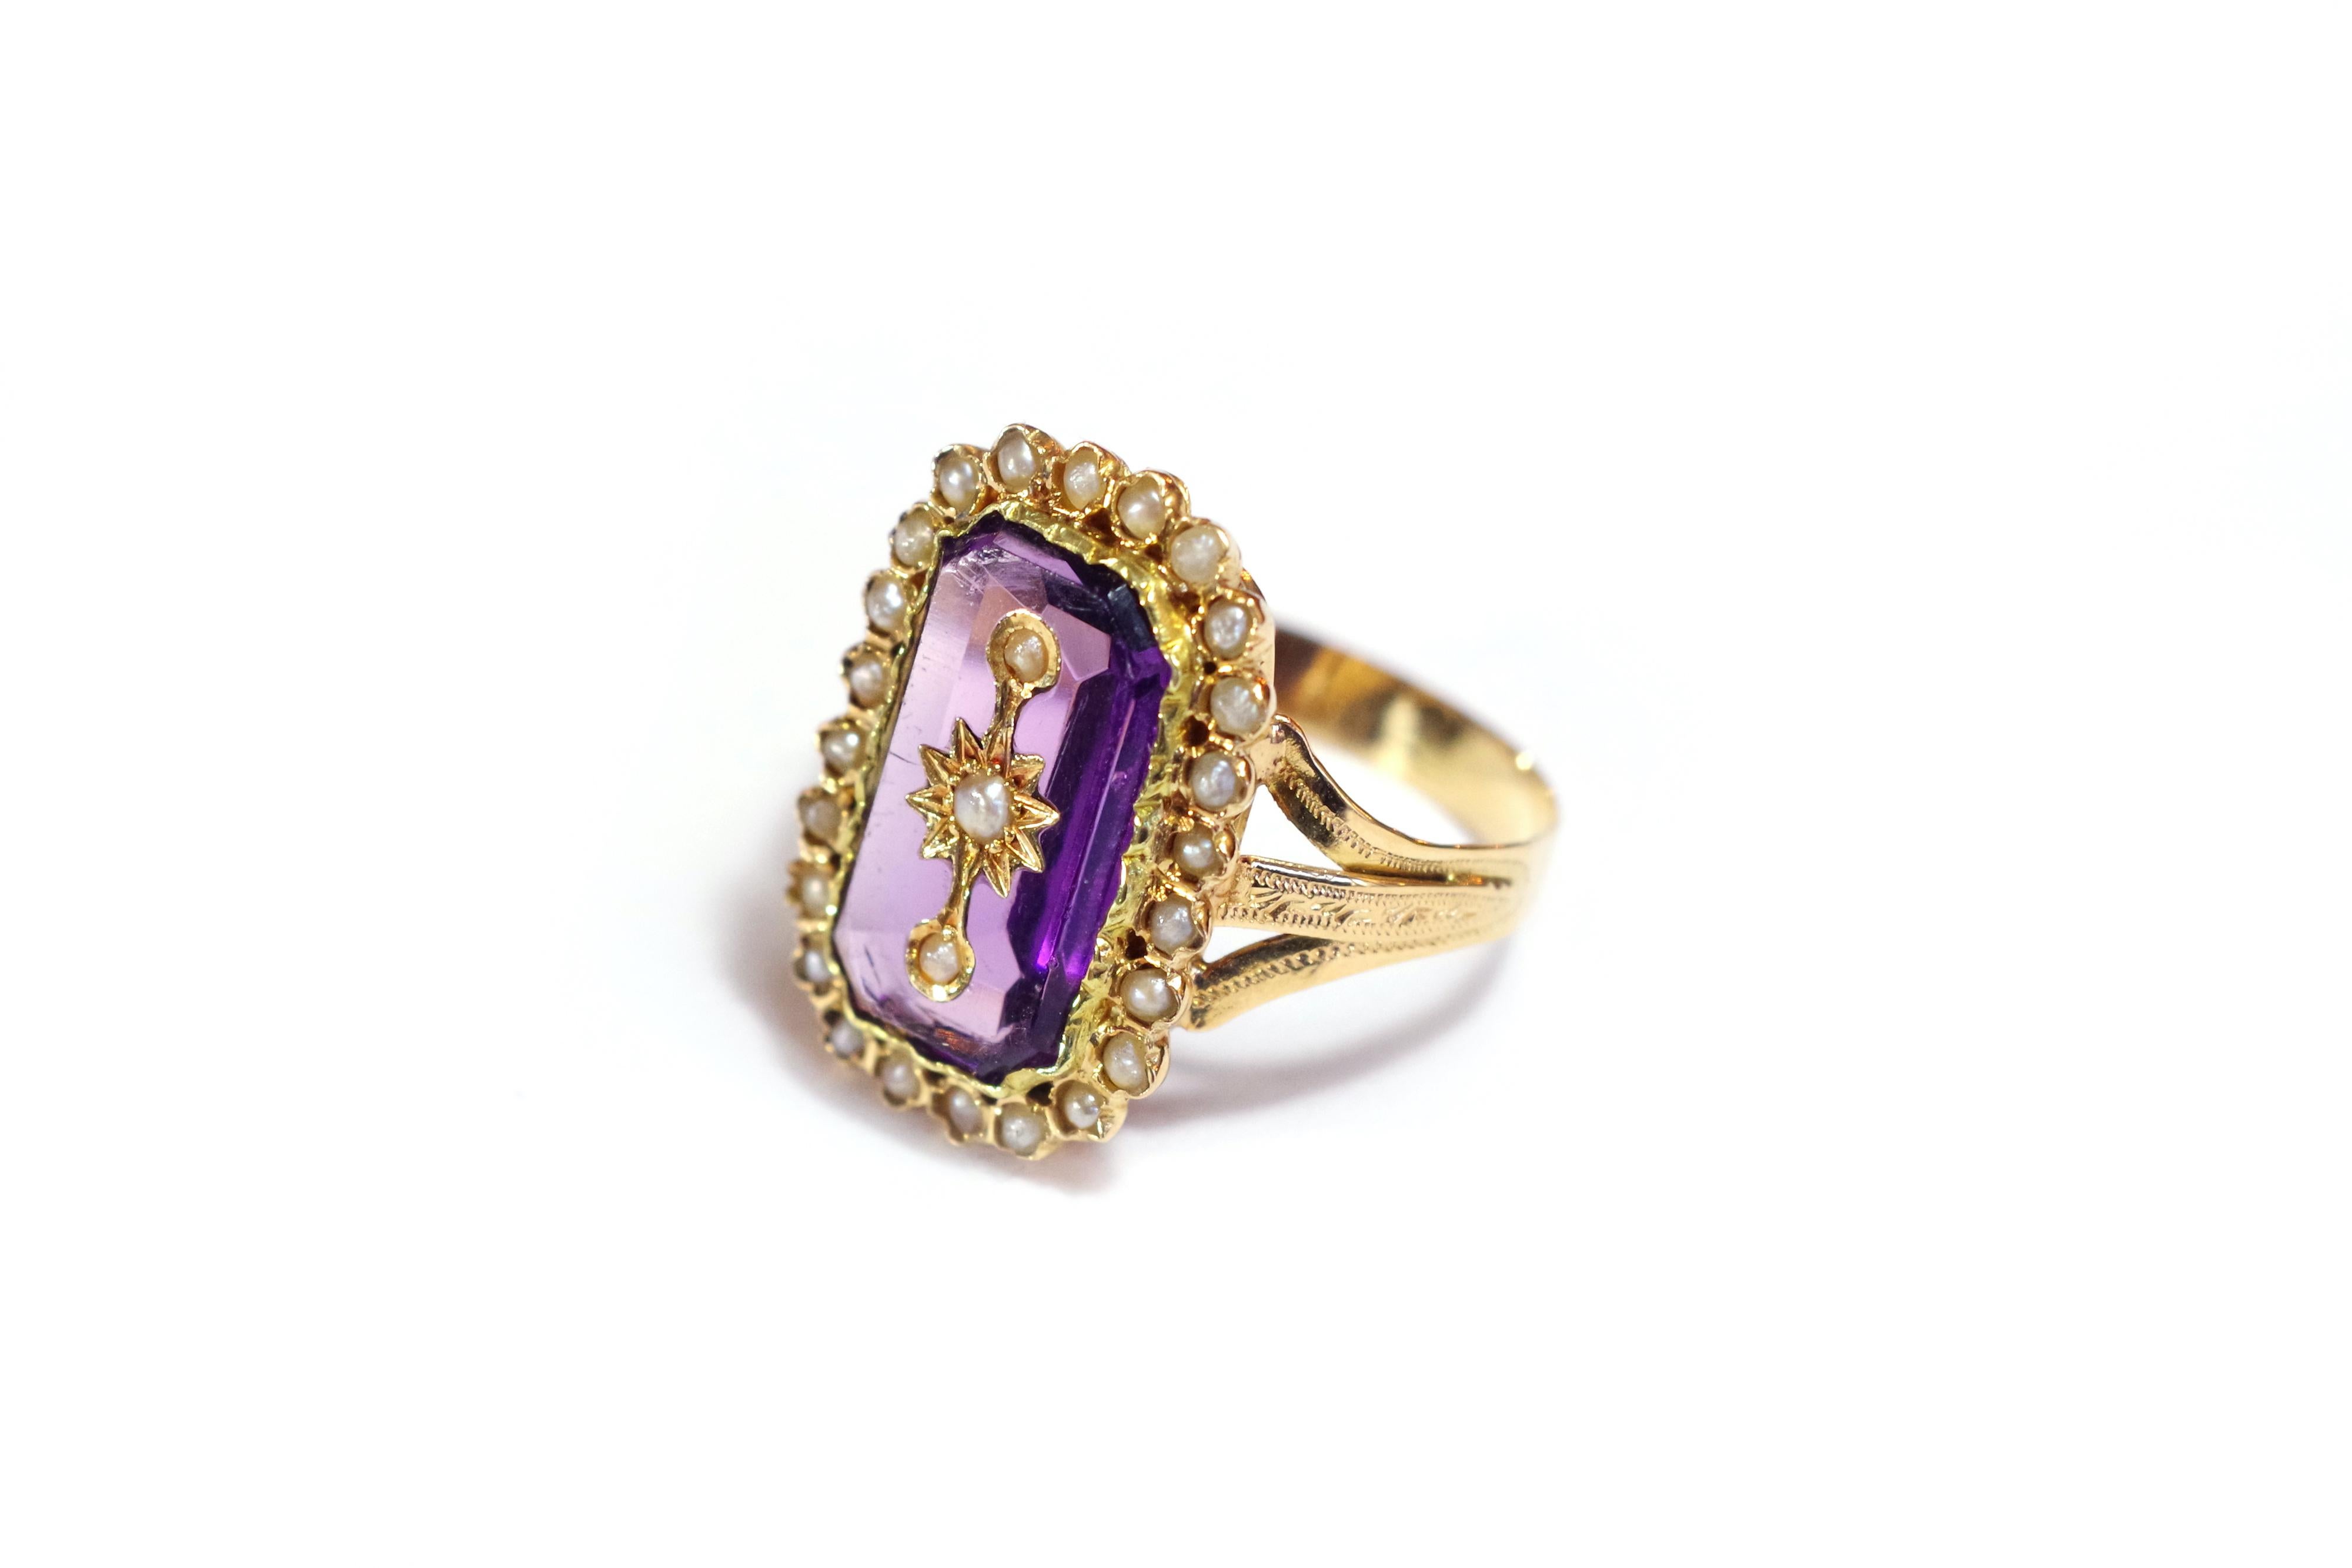 French Victorian pearl gold ring in yellow 18 karat gold. The ring is with a faceted purple glass imitating amethyst, on which are encrusted three seed pearls in a golden and starry decoration. The glass is surrounded by 23 half pearls. The ring is